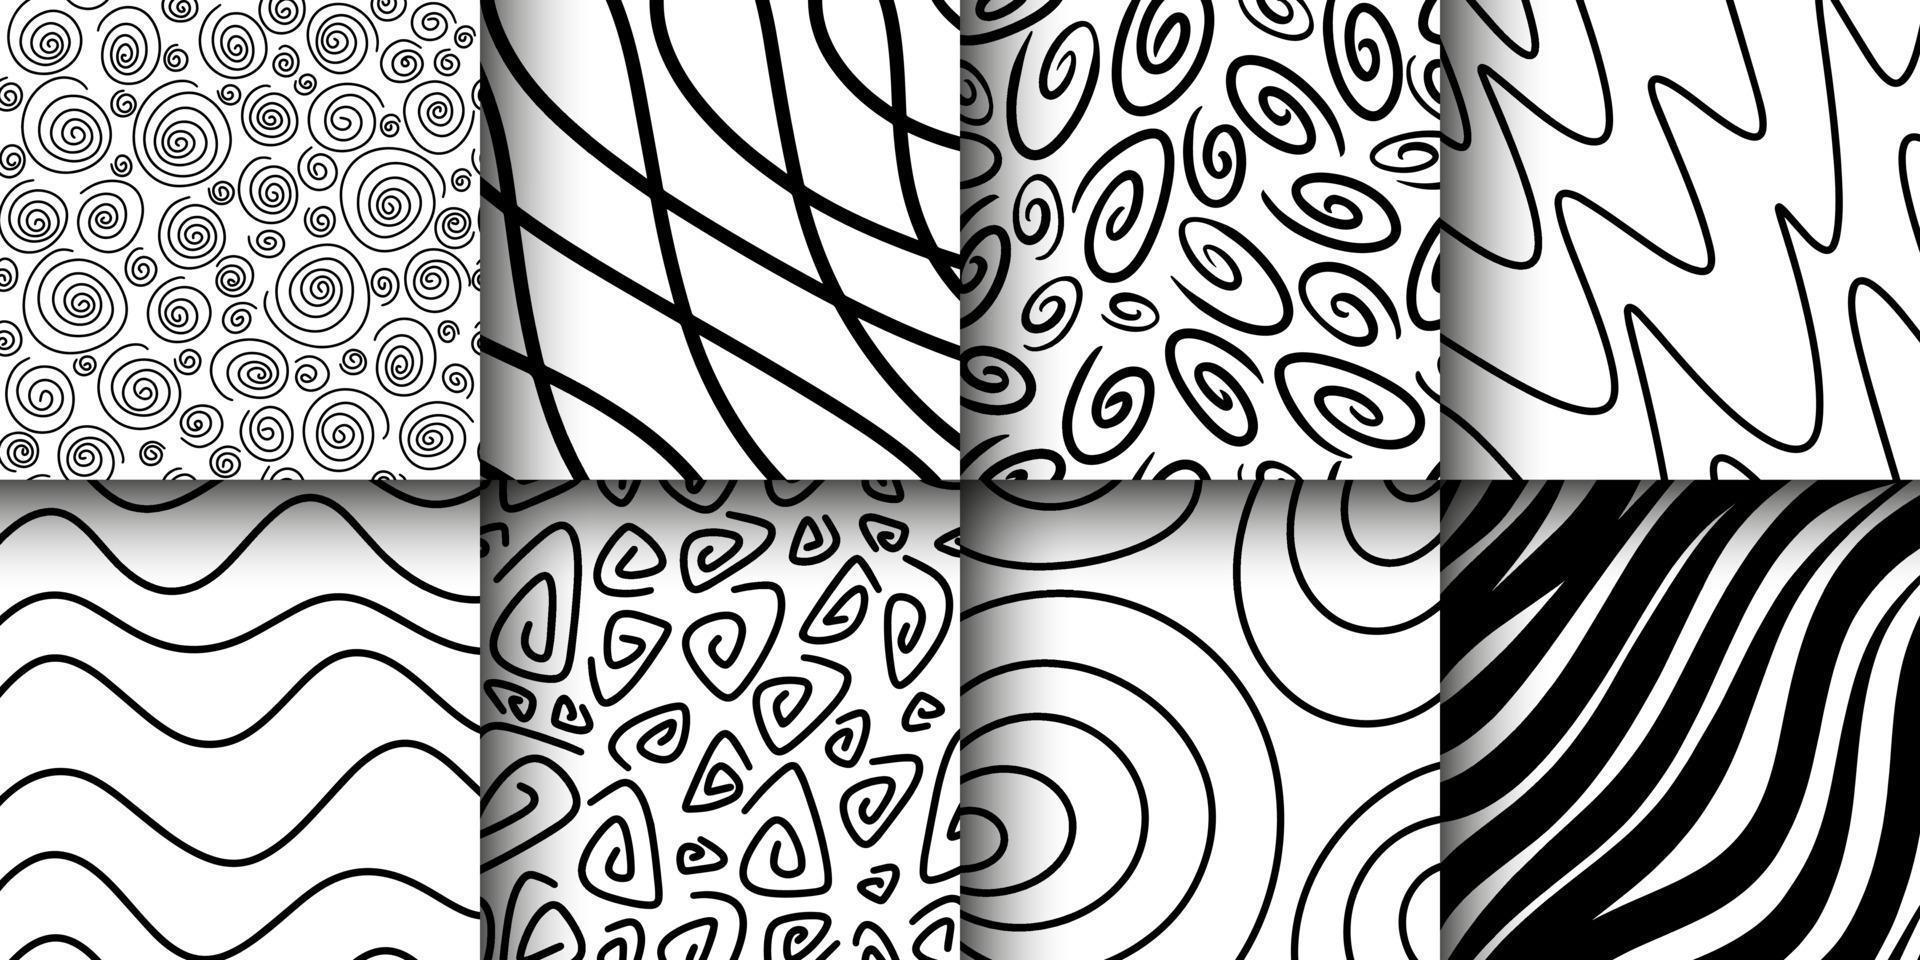 Hand-drawn ink pattern and textures set. Expressive seamless abstract vector backgrounds in black and white. Trendy monochrome brush marks. Set of seamless abstract hand-drawn patterns. Vector modern